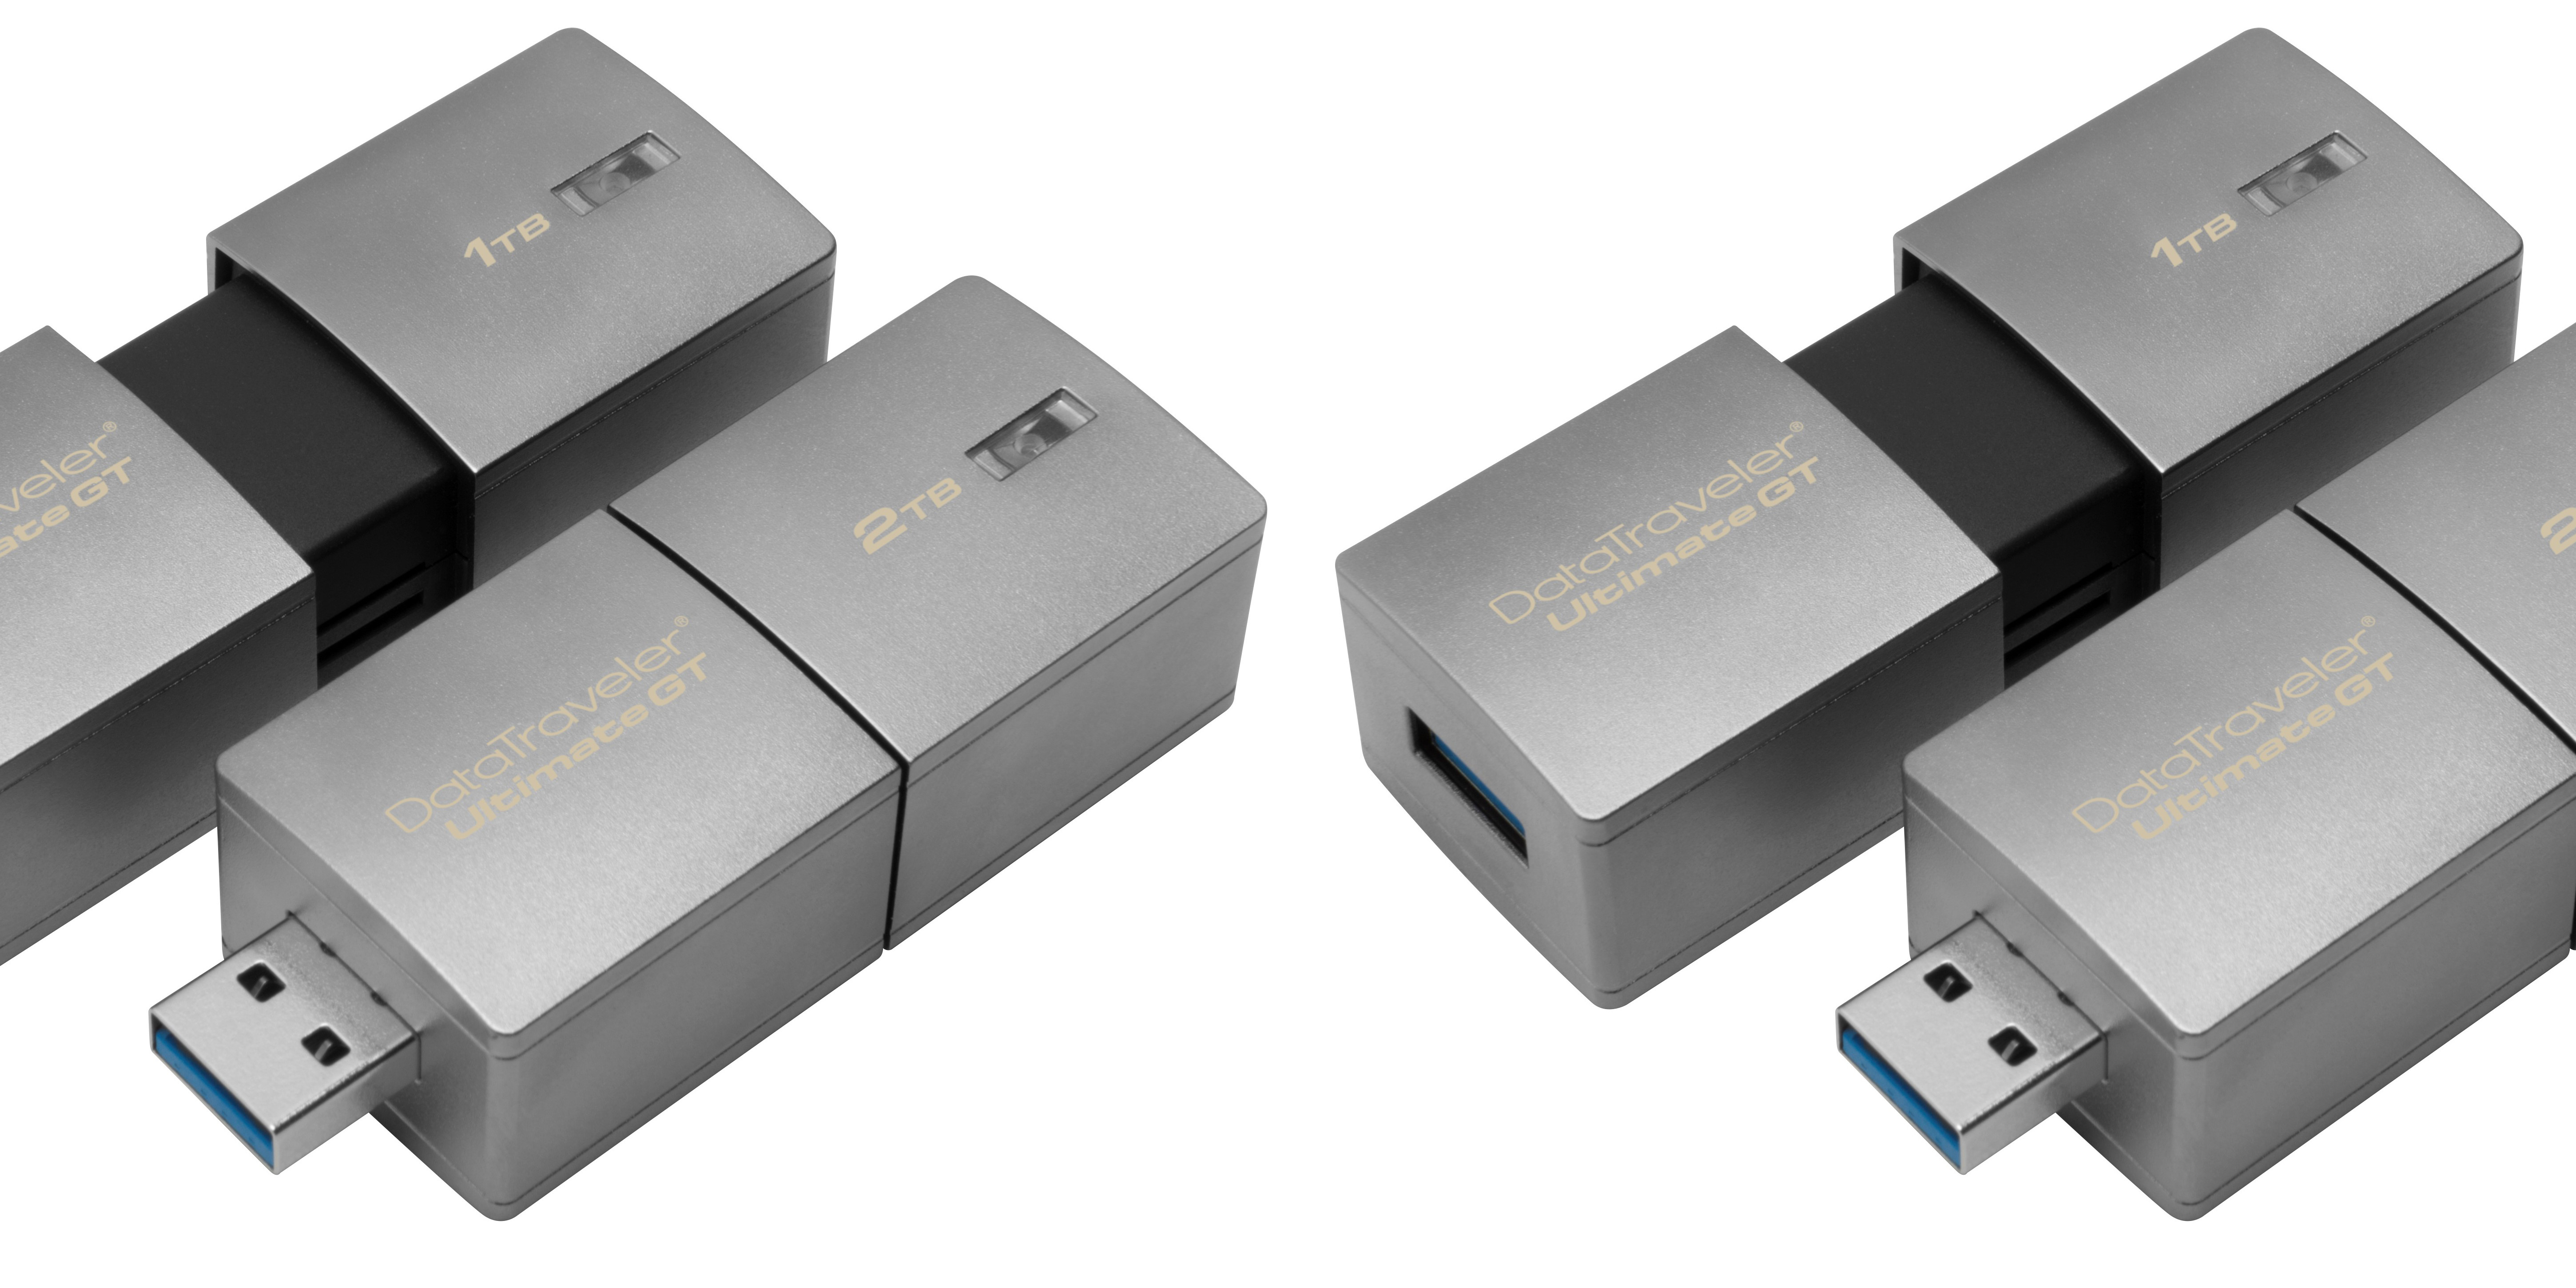 Kingston unveils "the world's highest capacity Flash drive" with the new DataTraveler Ultimate GT